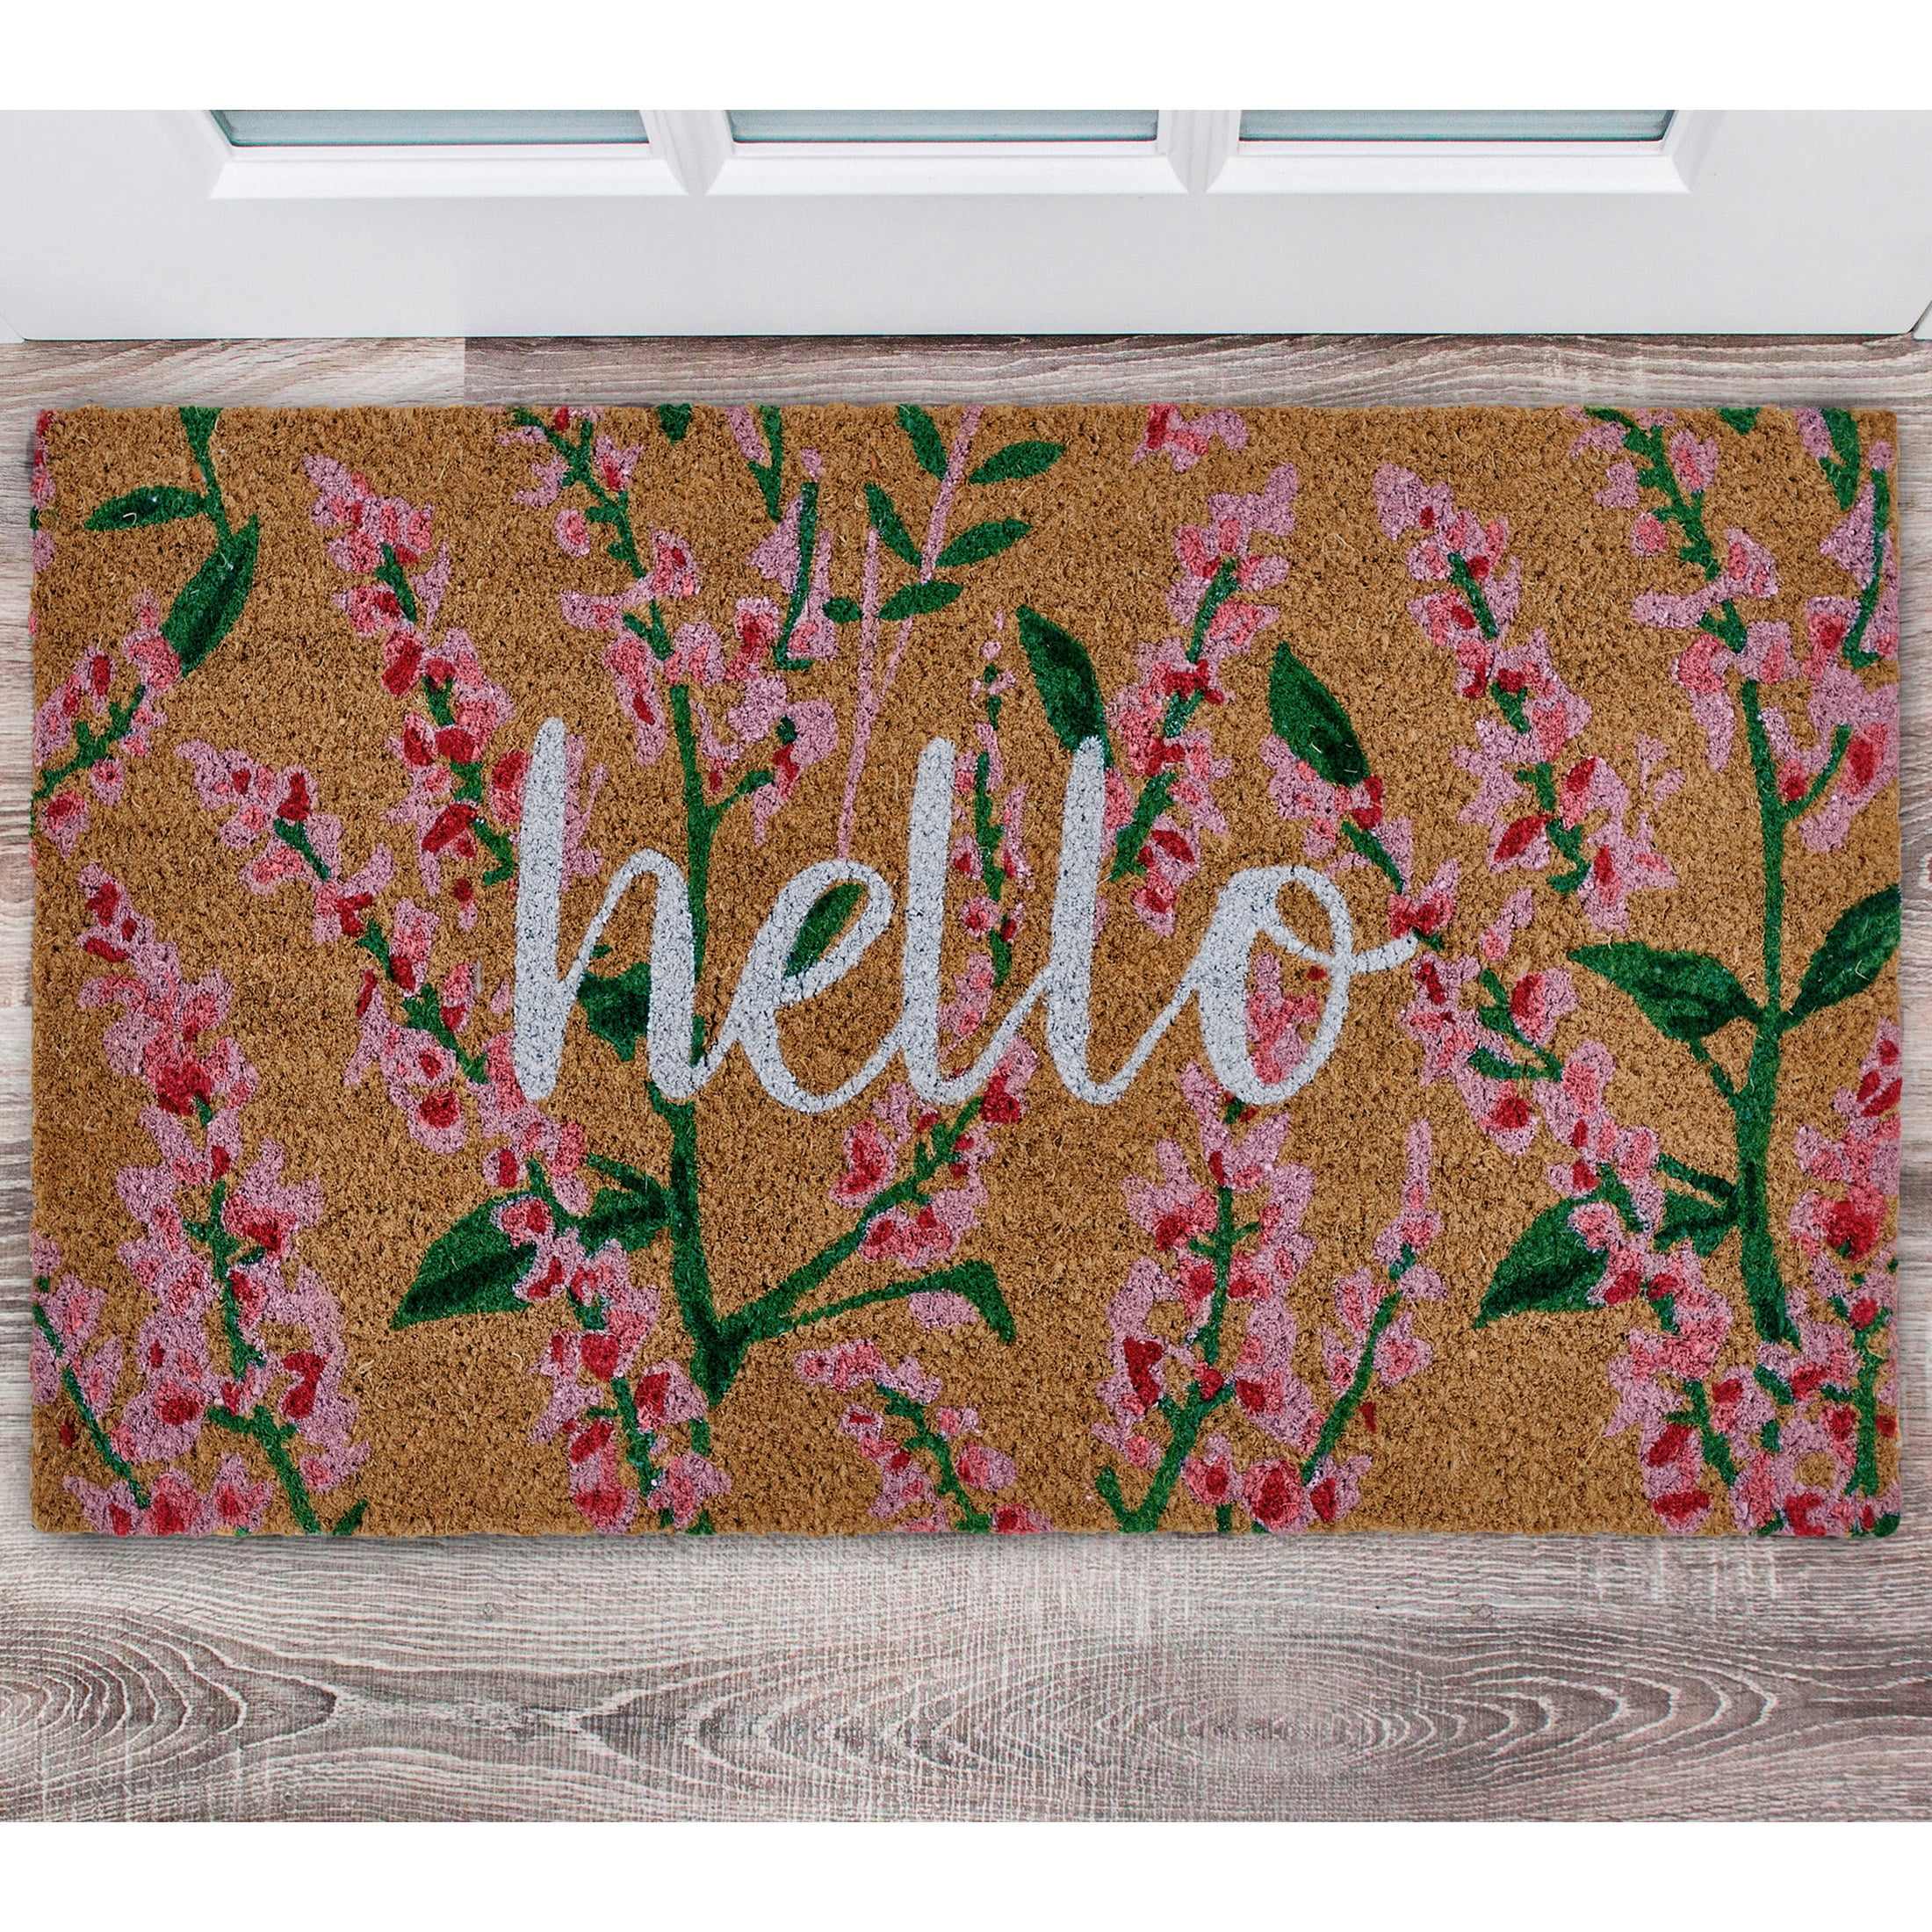 Home Décor Collection Hello Floral Natural/Pink Coir Outdoor Welcome  Doormat, 18 x 30 